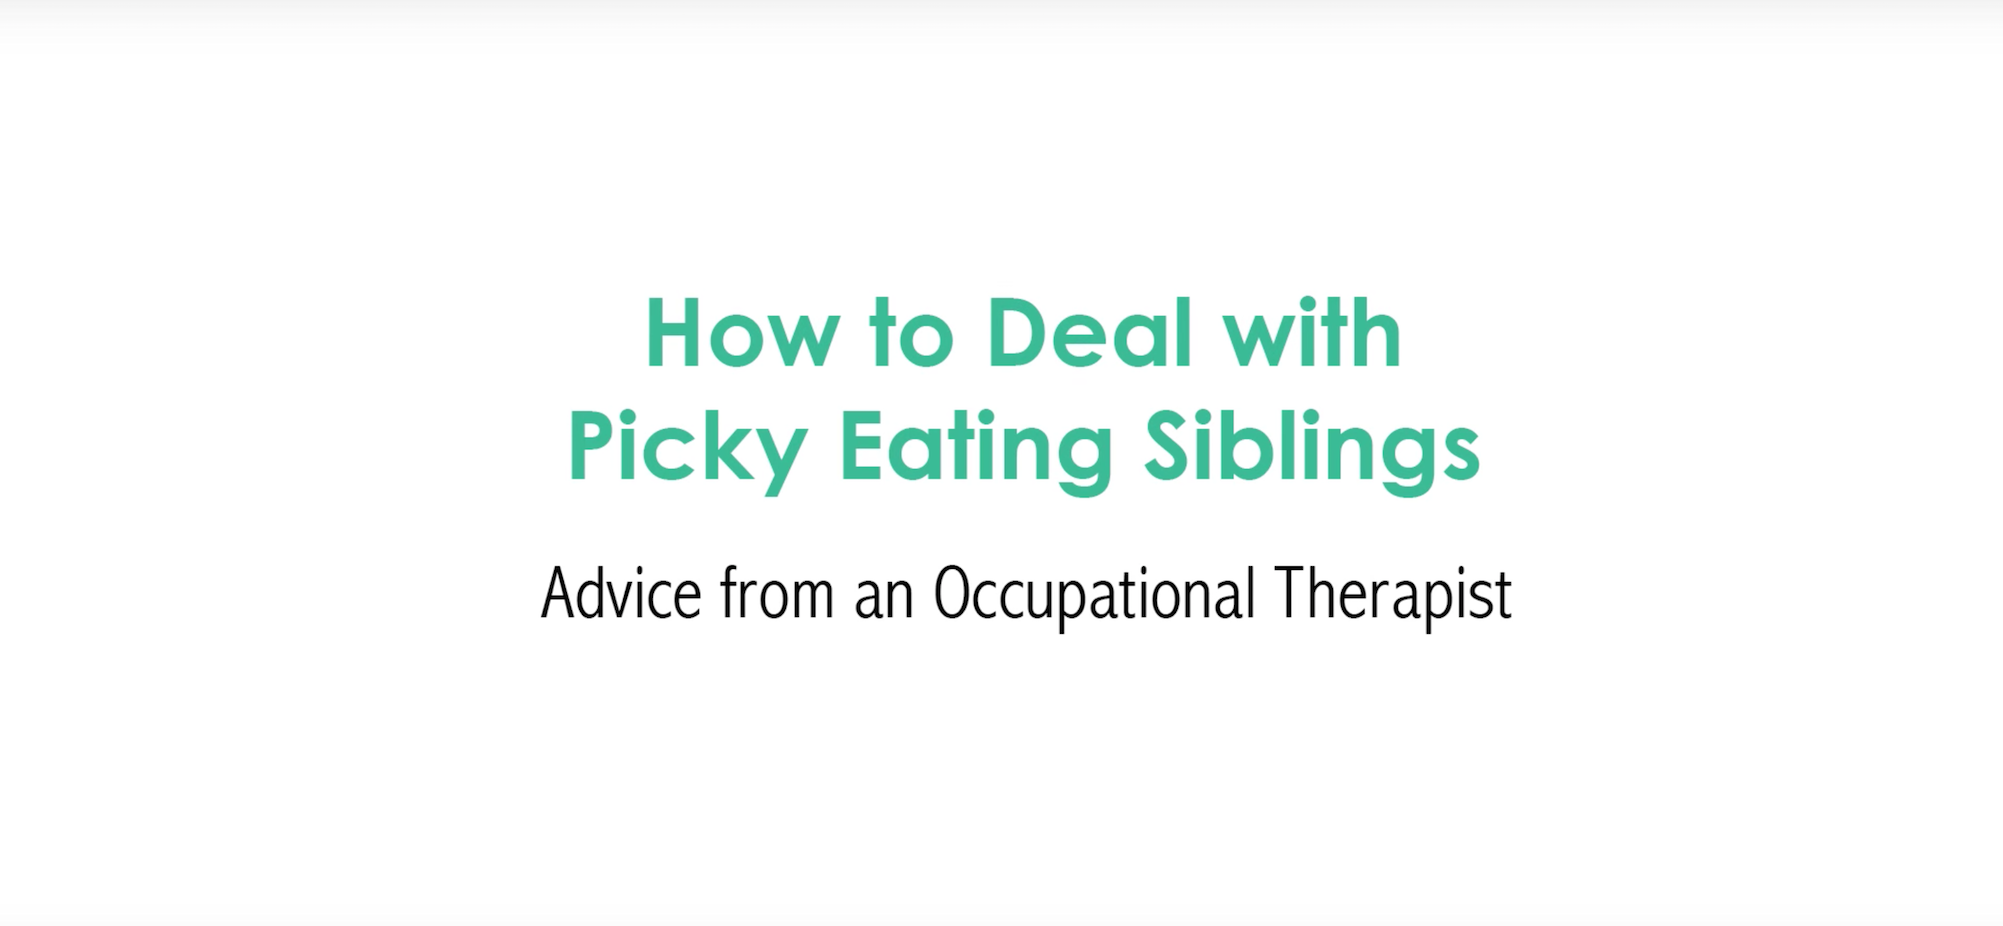 How To Deal With Picky Eating Siblings